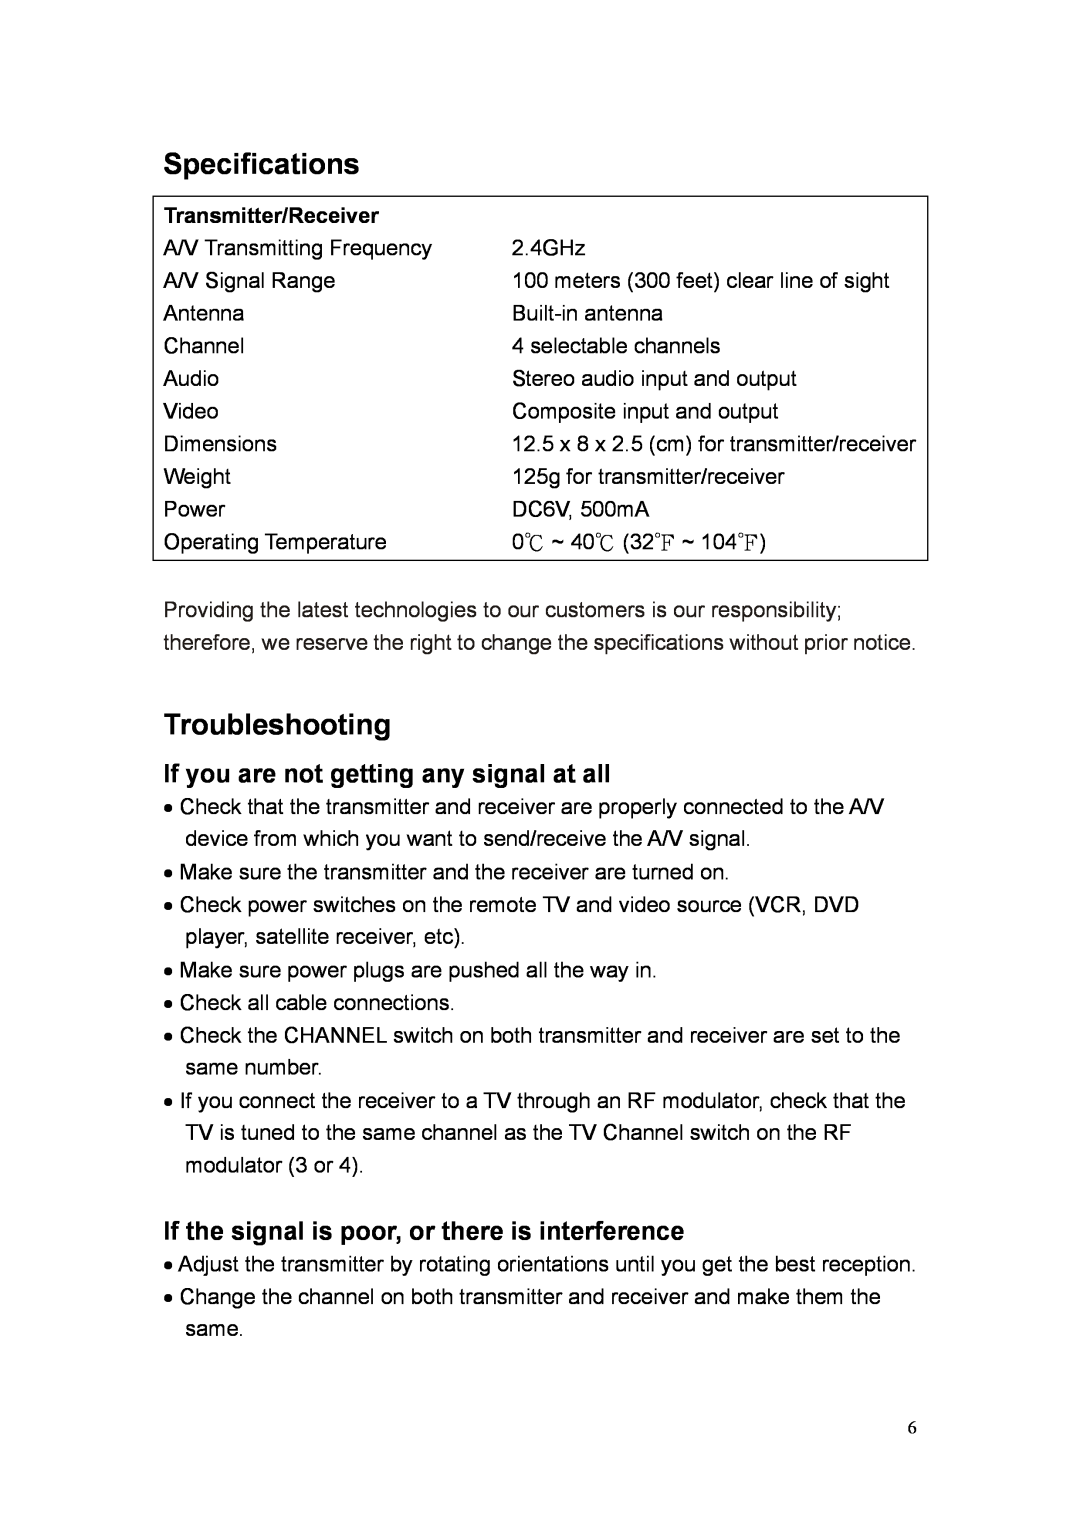 Quatech 2.4GHz user manual Specifications, Troubleshooting, If you are not getting any signal at all, Transmitter/Receiver 